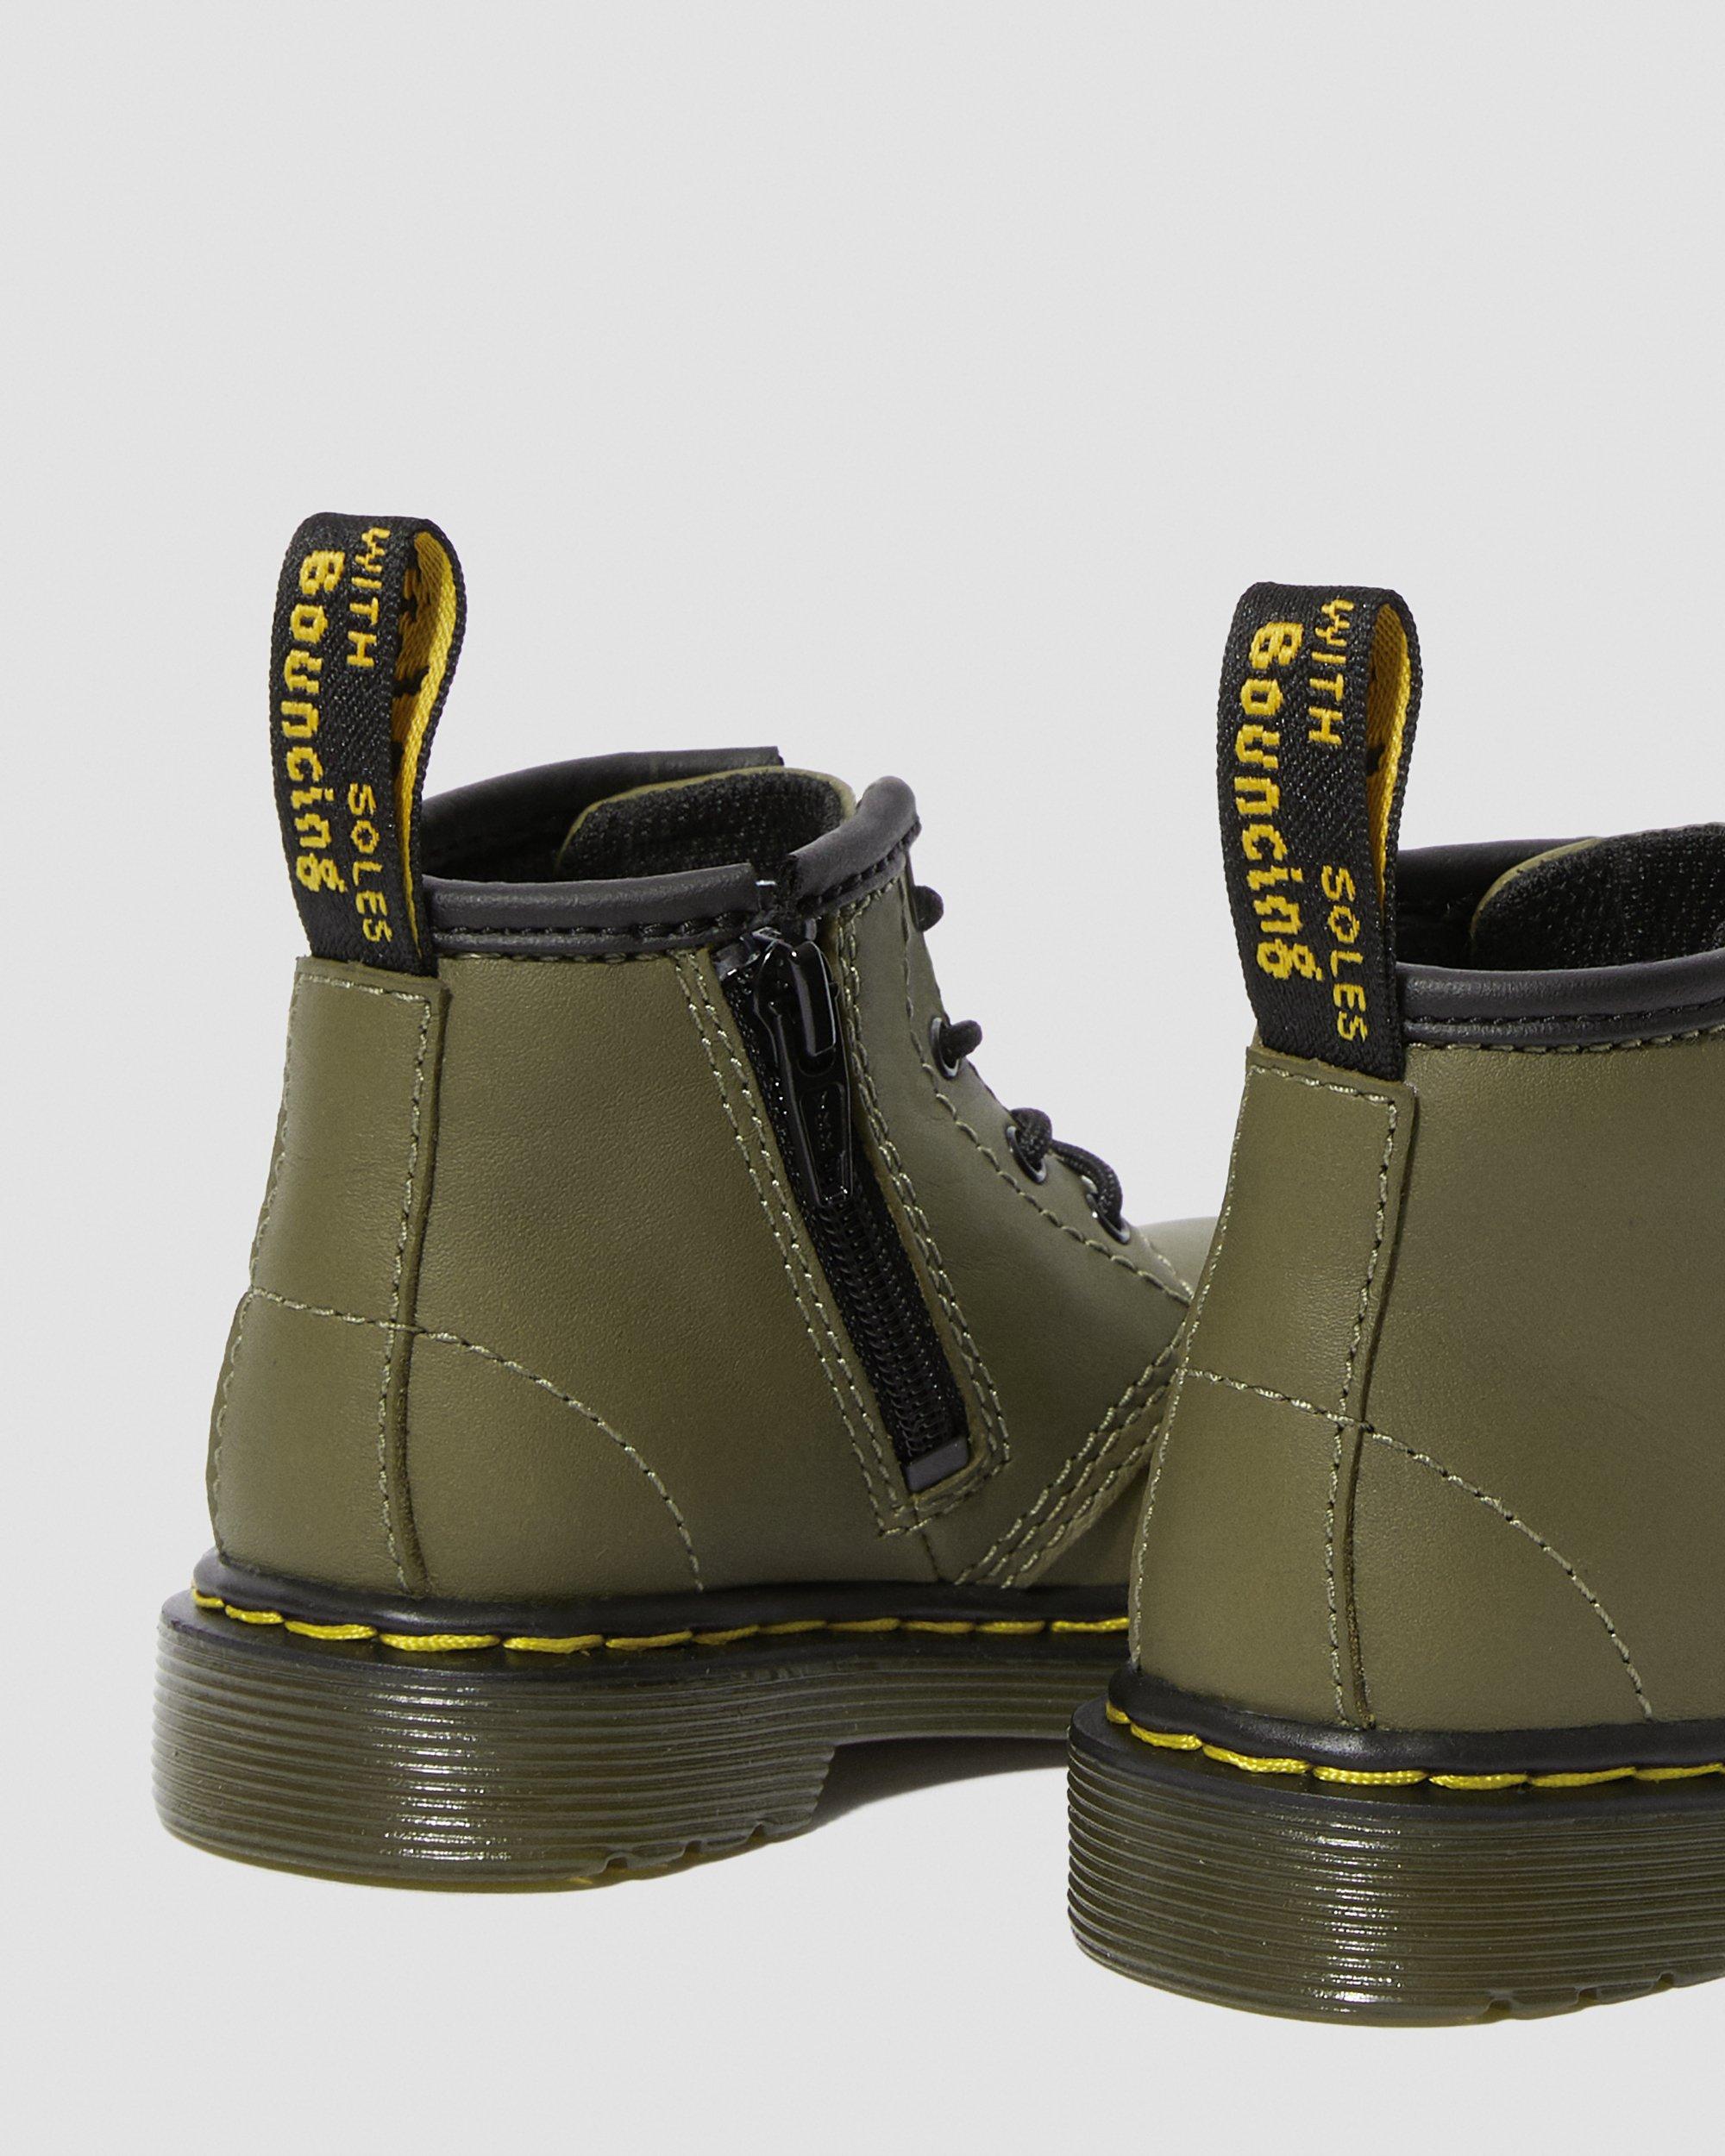 Infant 1460 Leather Lace Up Boots in Olive